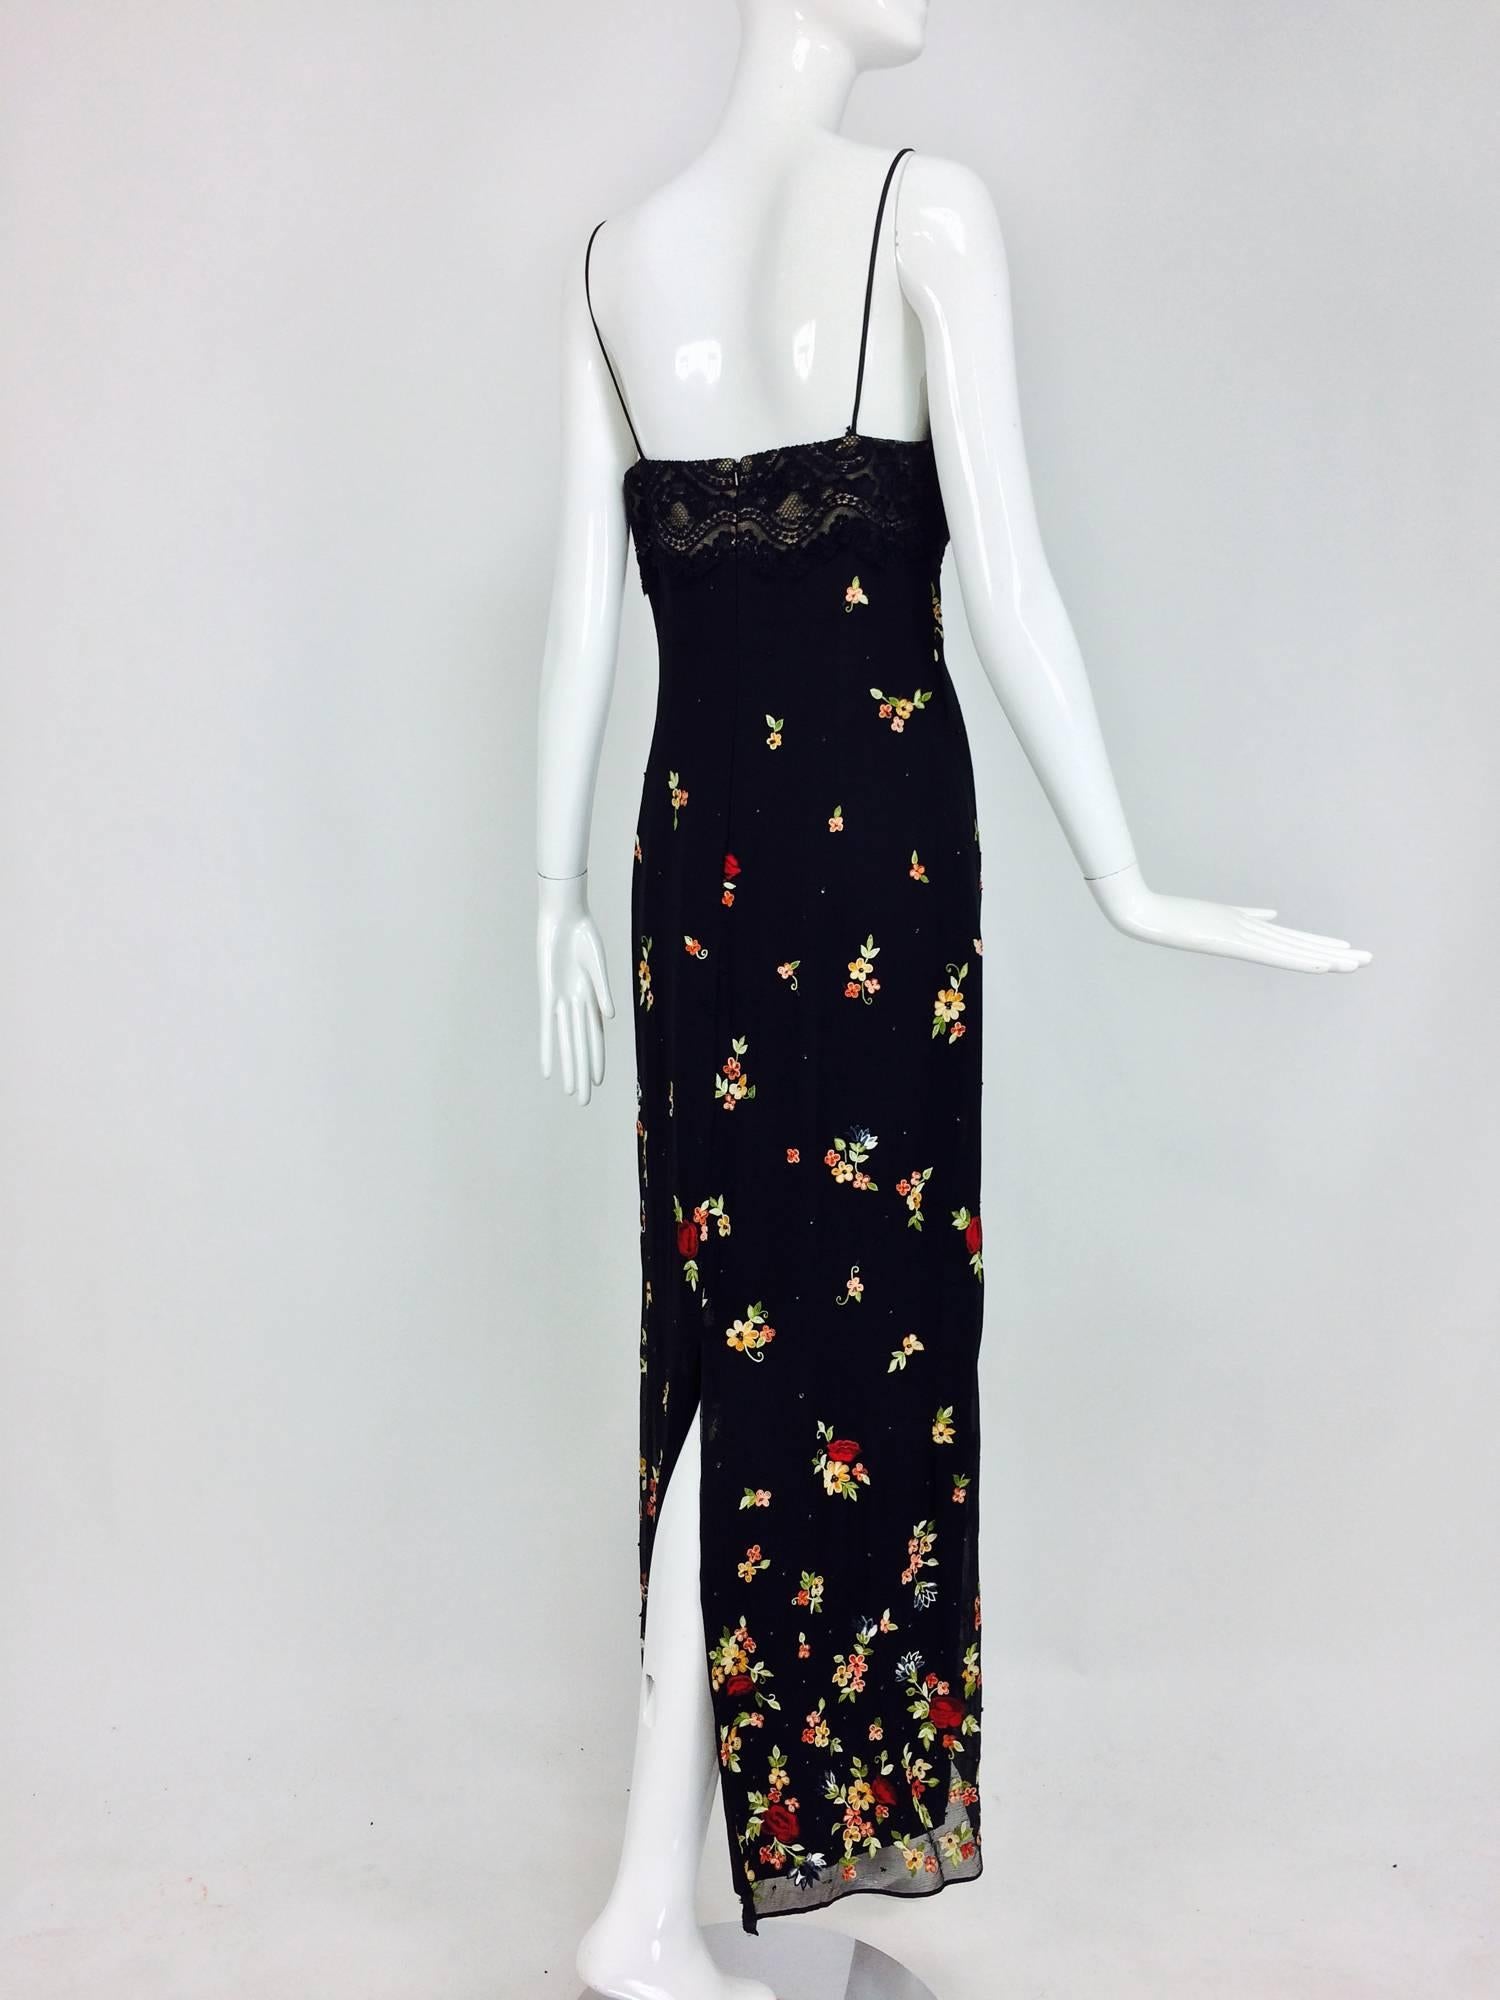 Women's Bellville Sassoon black lace bodice floral silk embroidered chiffon gown 10